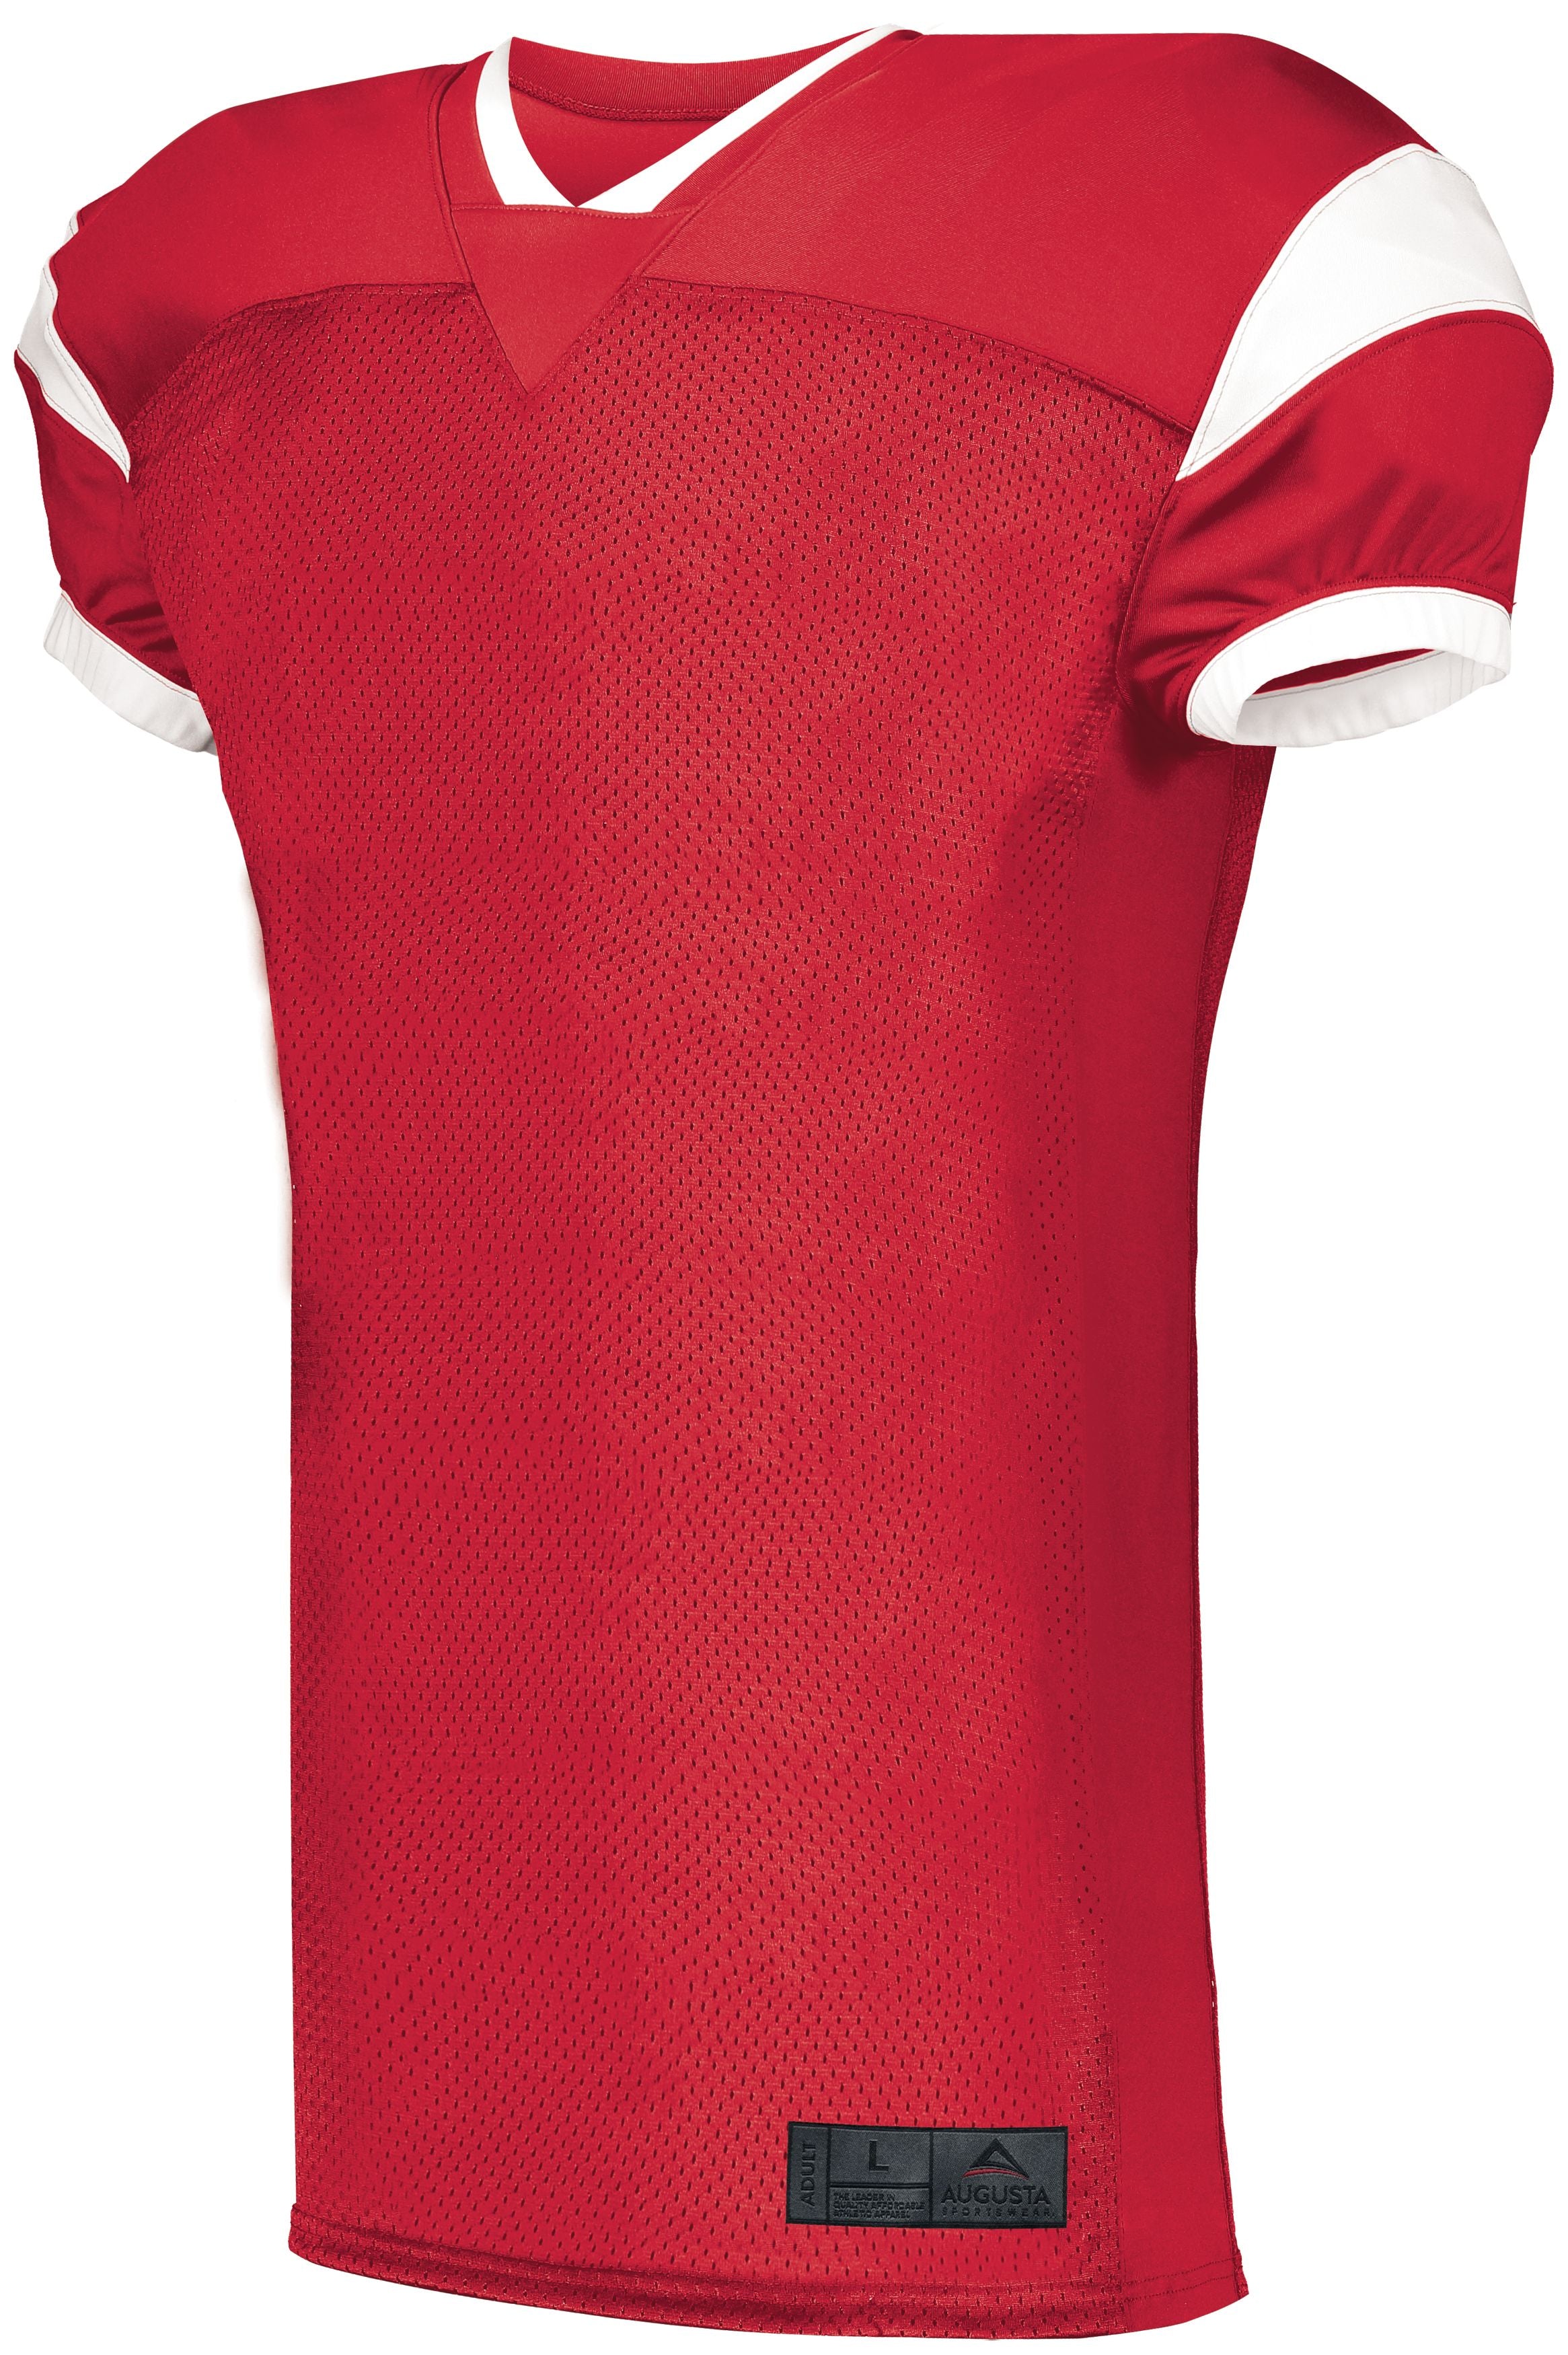 Augusta Sportswear Slant Football Jersey in Red/White  -Part of the Adult, Adult-Jersey, Augusta-Products, Football, Shirts, All-Sports, All-Sports-1 product lines at KanaleyCreations.com